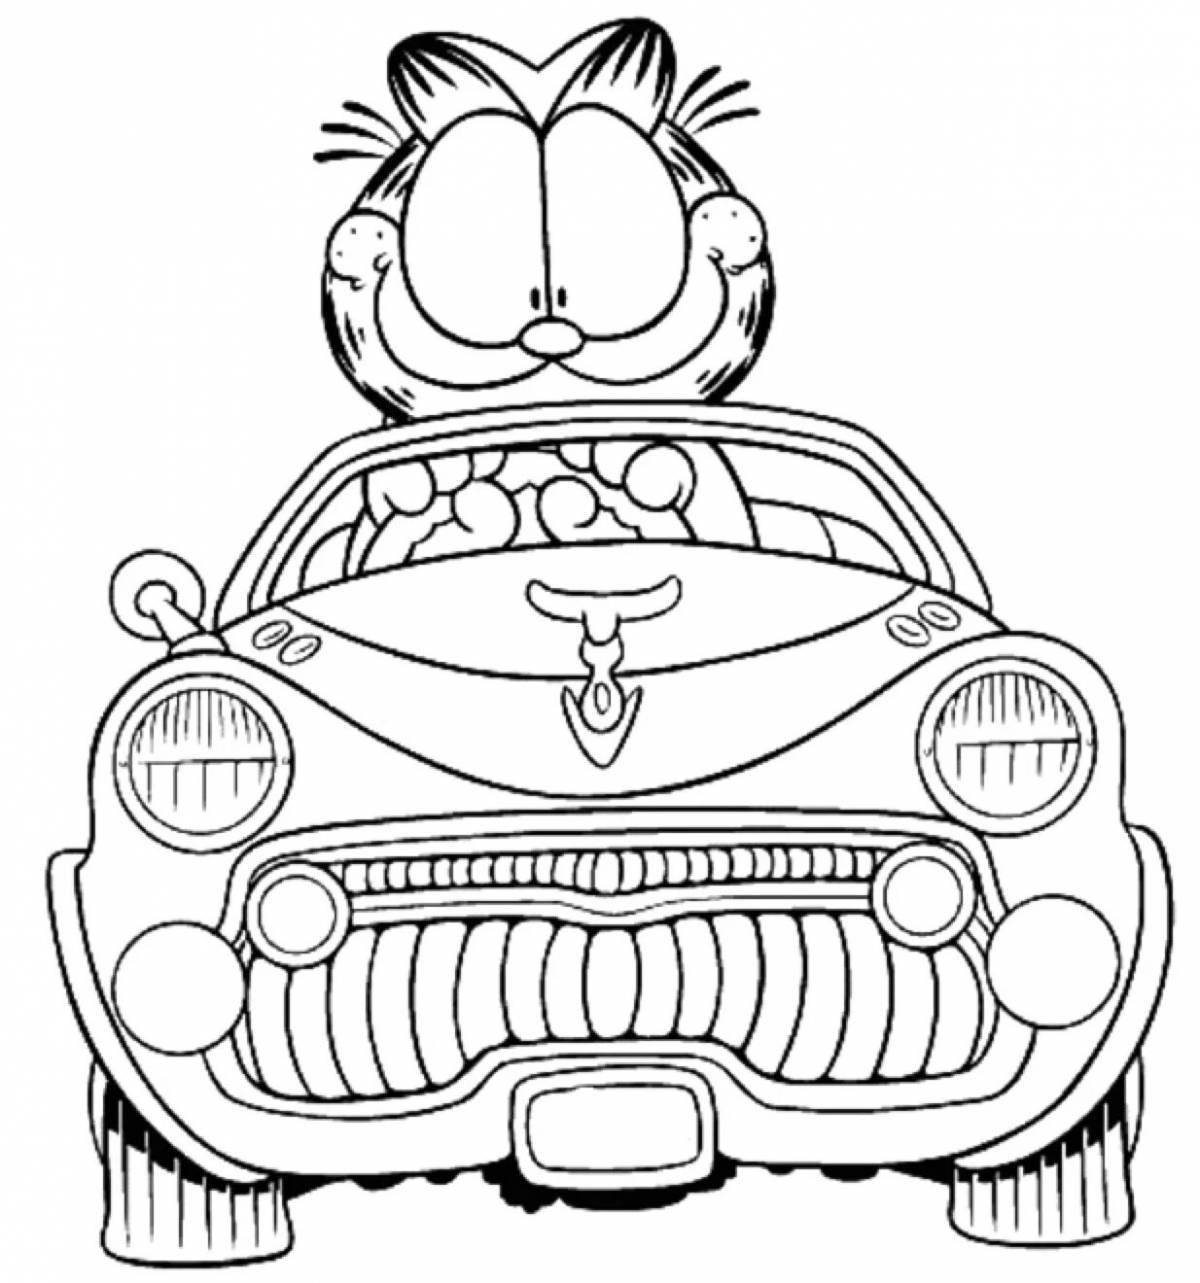 Coloring pages funny cars for adults